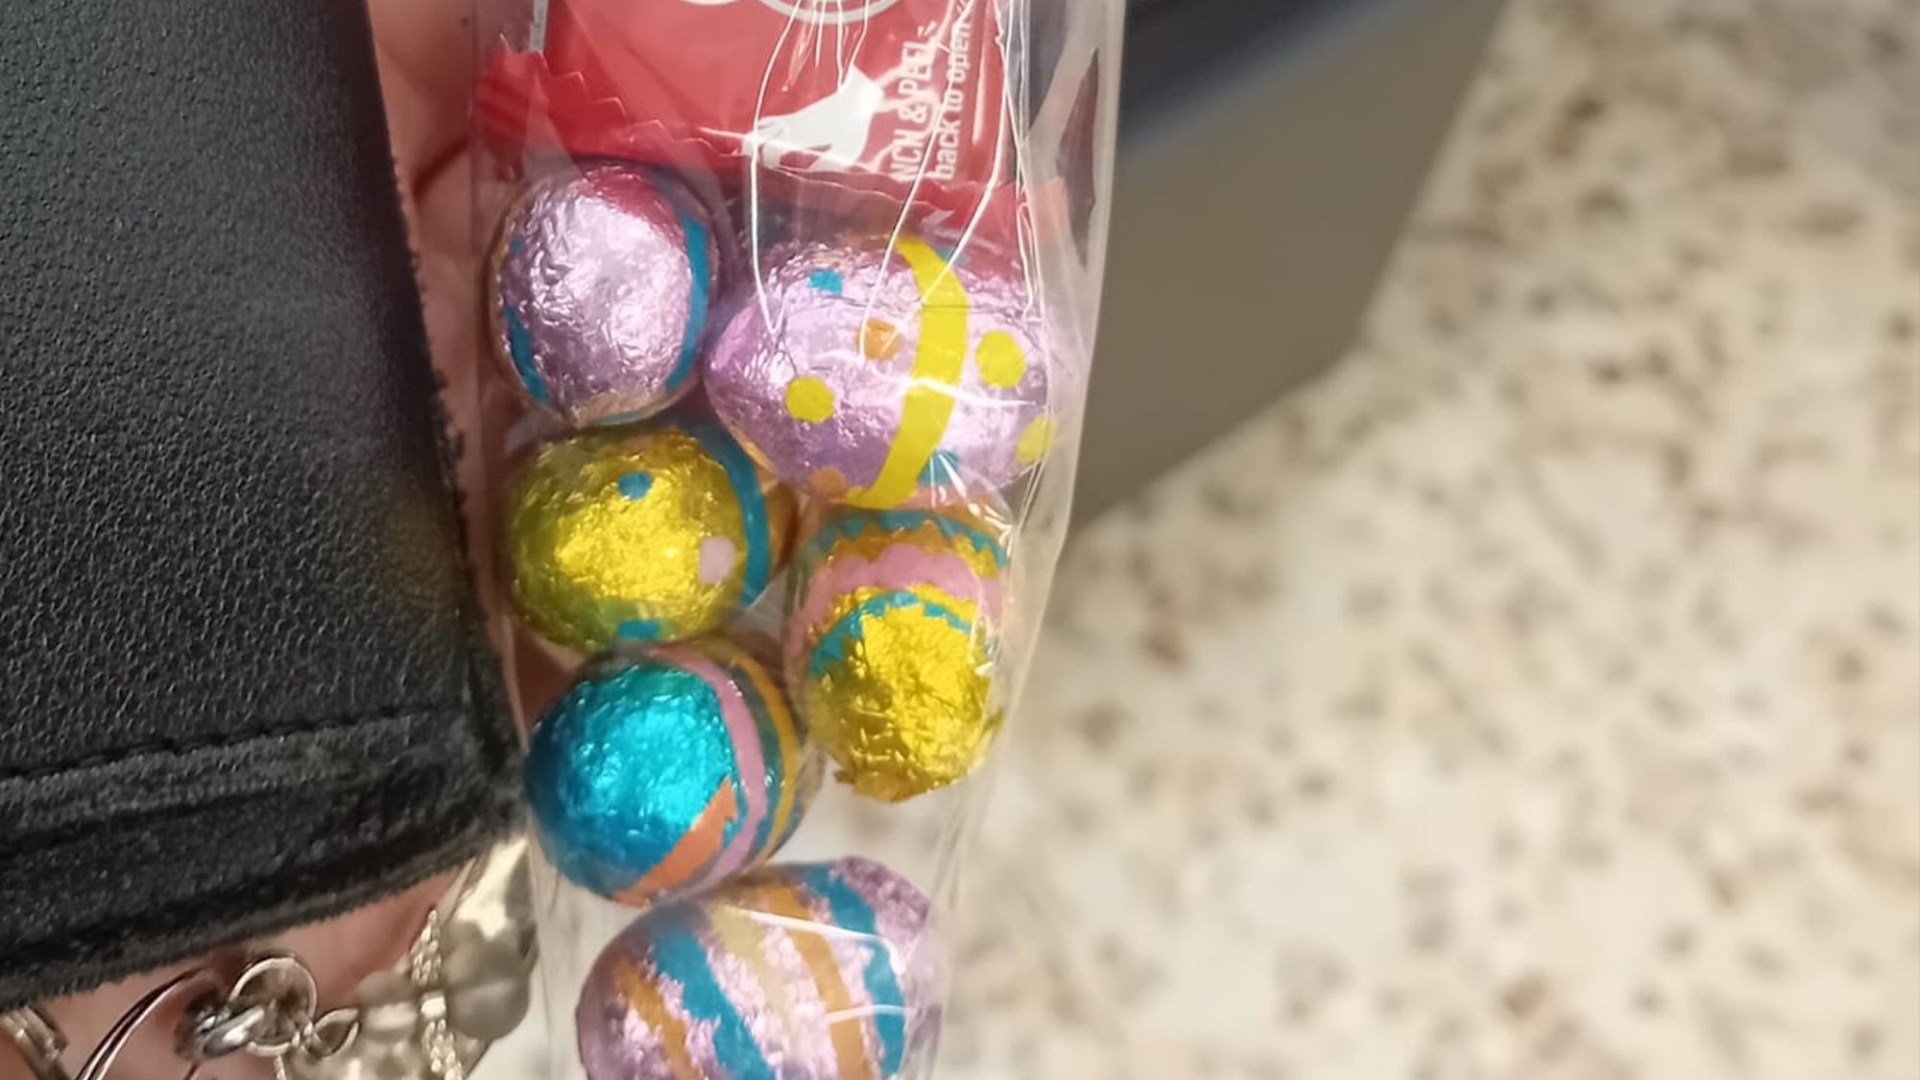 “Score FREE Easter chocolates at the supermarket and watch shoppers go wild – discover the secret here!” #Easterchocolates #supermarket #freedelivery